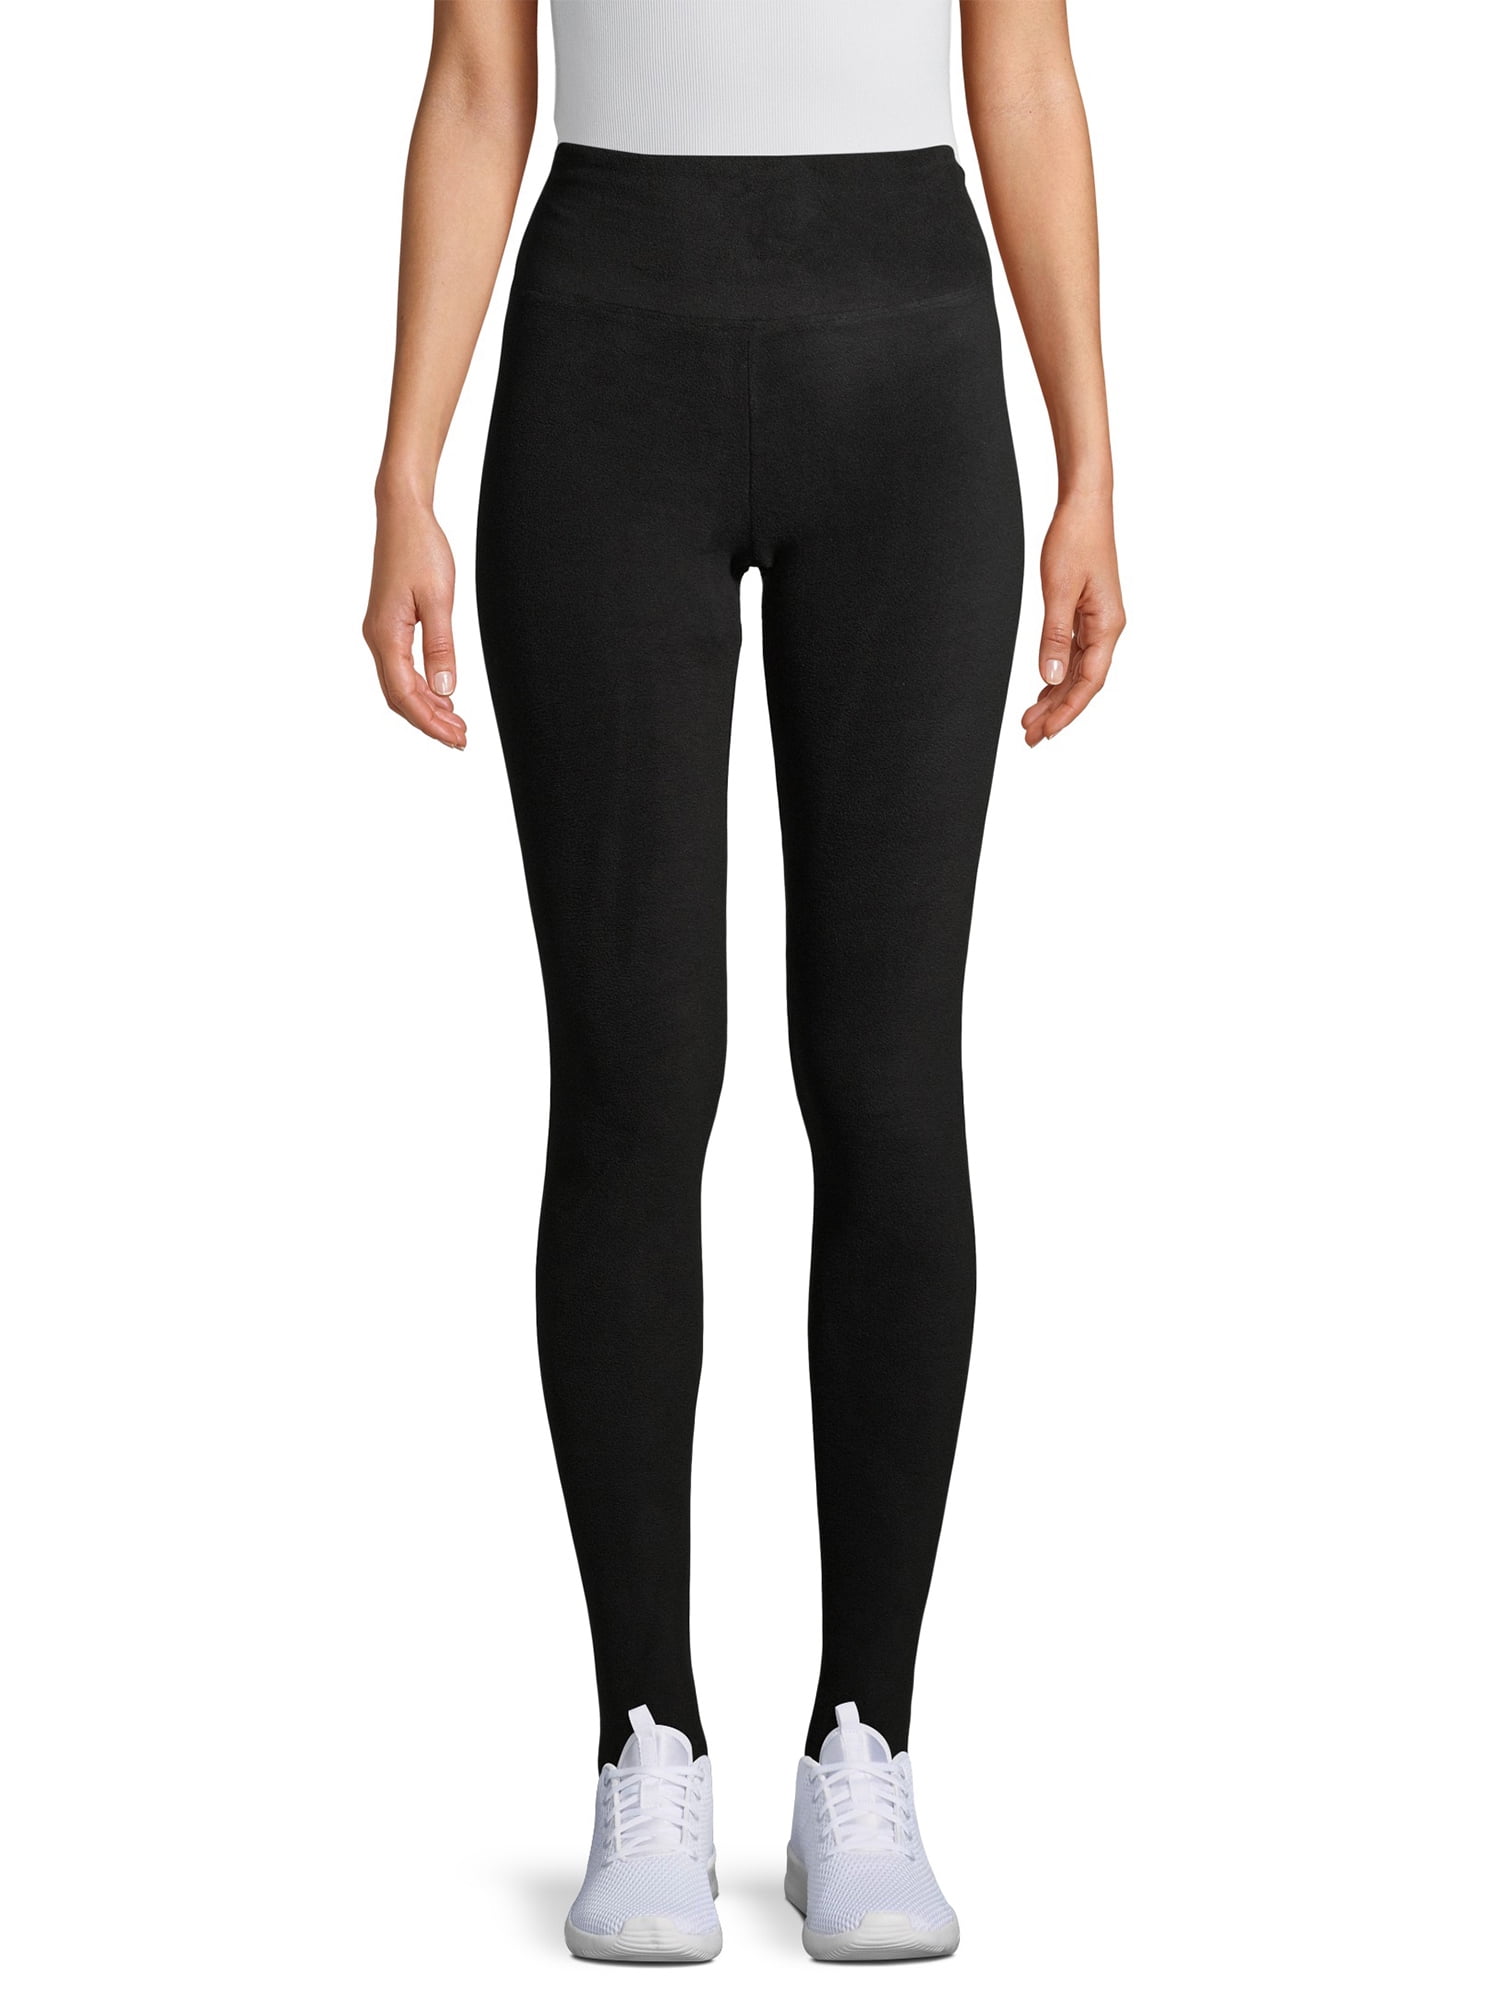 Climate Right Cuddl Duds Women Thermal Guard Leggings Black 